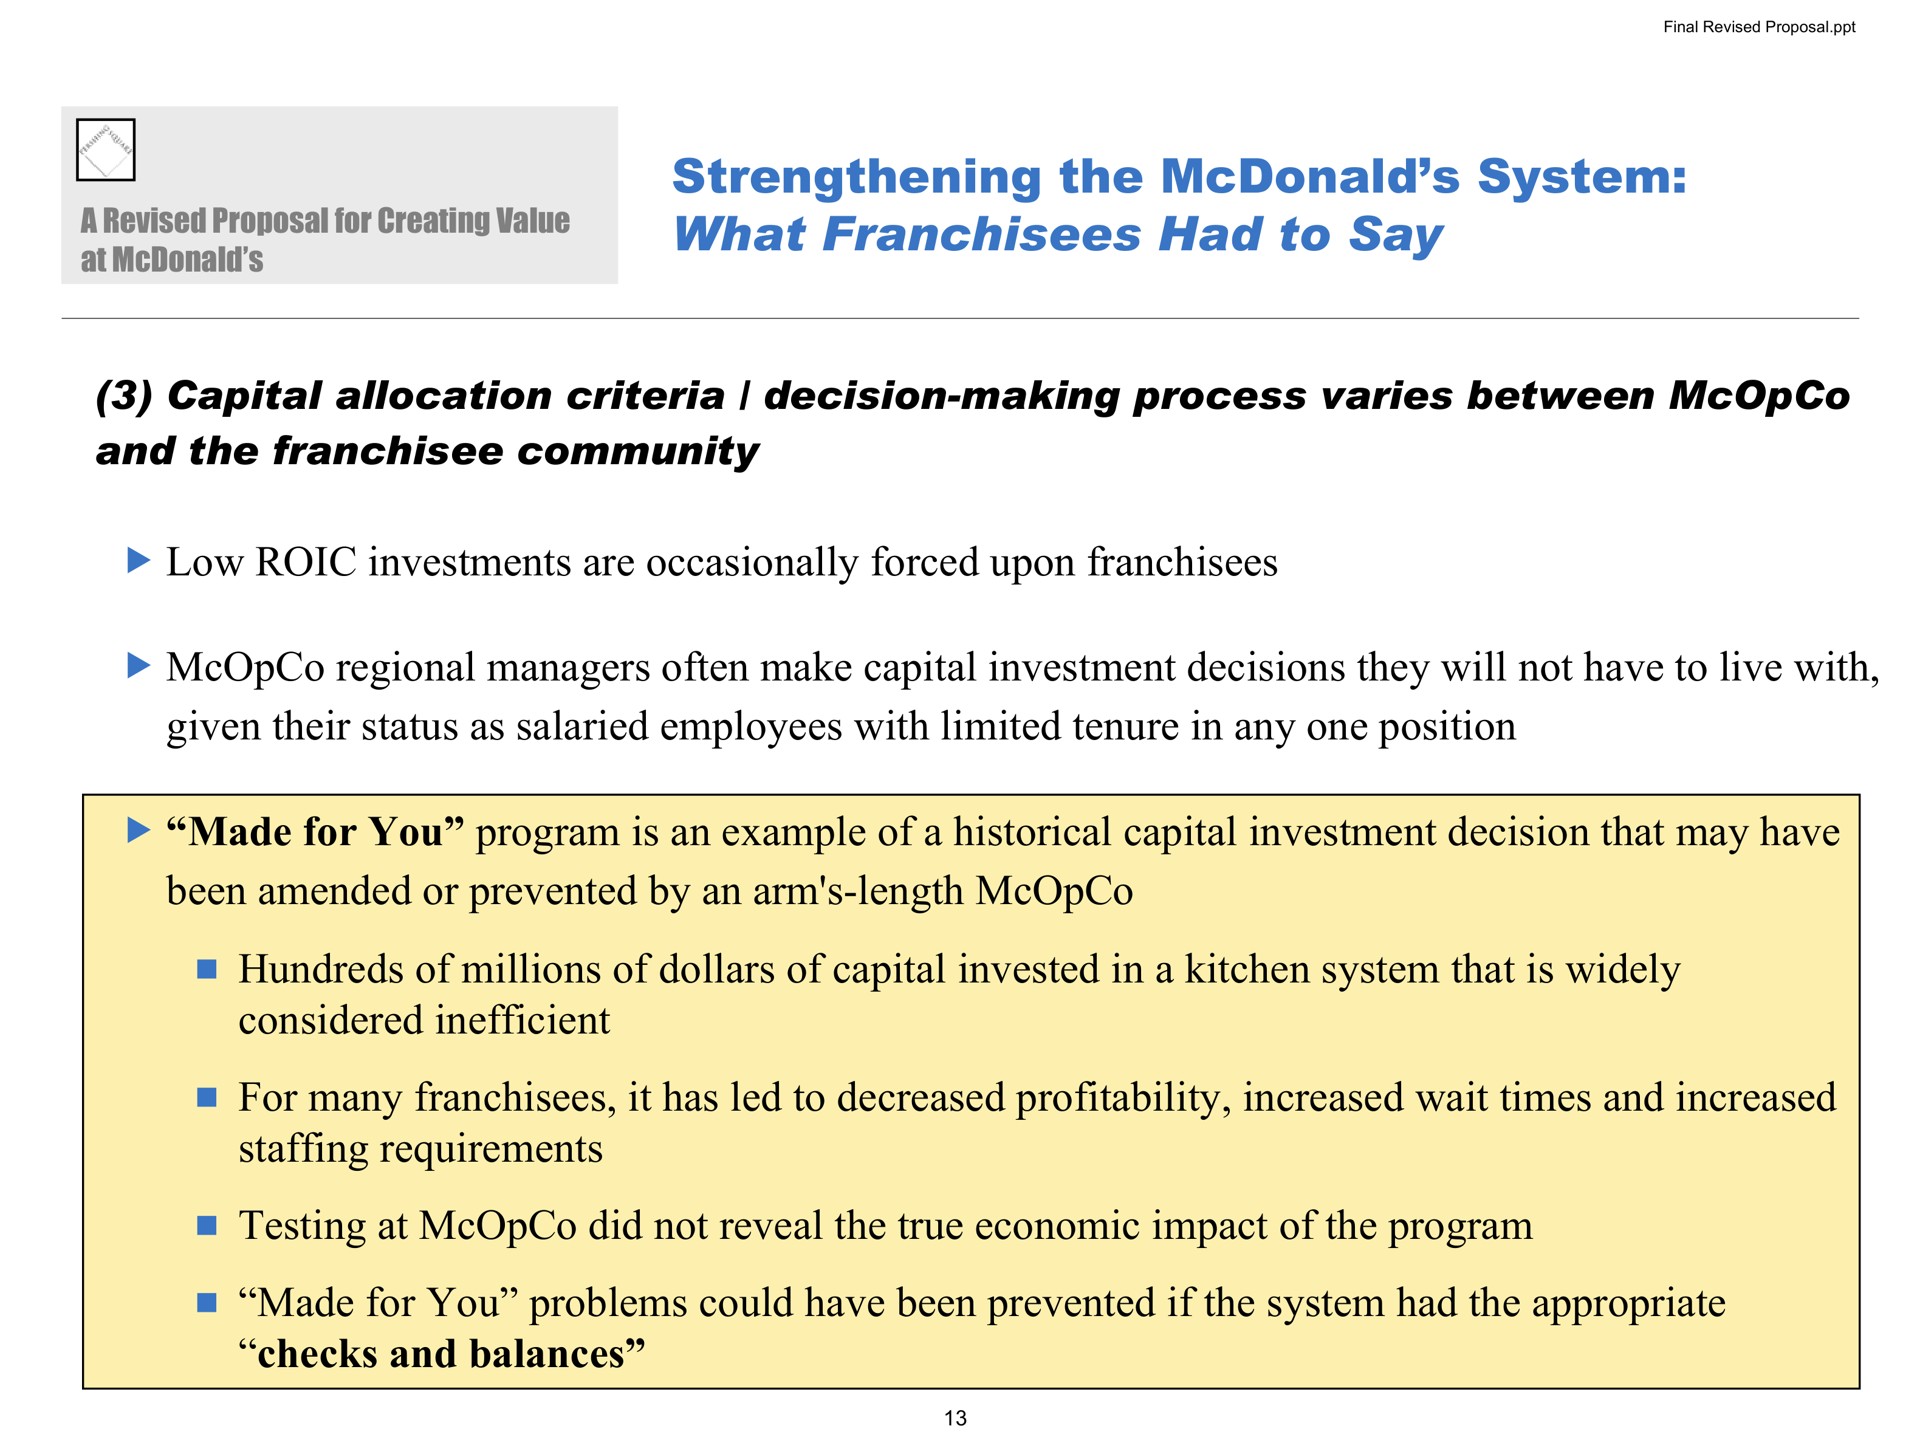 strengthening the system what franchisees had to say capital allocation criteria decision making process varies between and the community low investments are occasionally forced upon franchisees regional managers often make capital investment decisions they will not have to live with given their status as salaried employees with limited tenure in any one position made for you program is an example of a historical capital investment decision that may have been amended or prevented by an arm length hundreds of millions of dollars of capital invested in a kitchen system that is widely considered inefficient for many franchisees it has led to decreased profitability increased wait times and increased staffing requirements testing at did not reveal the true economic impact of the program made for you problems could have been prevented if the system had the appropriate checks and balances | Pershing Square